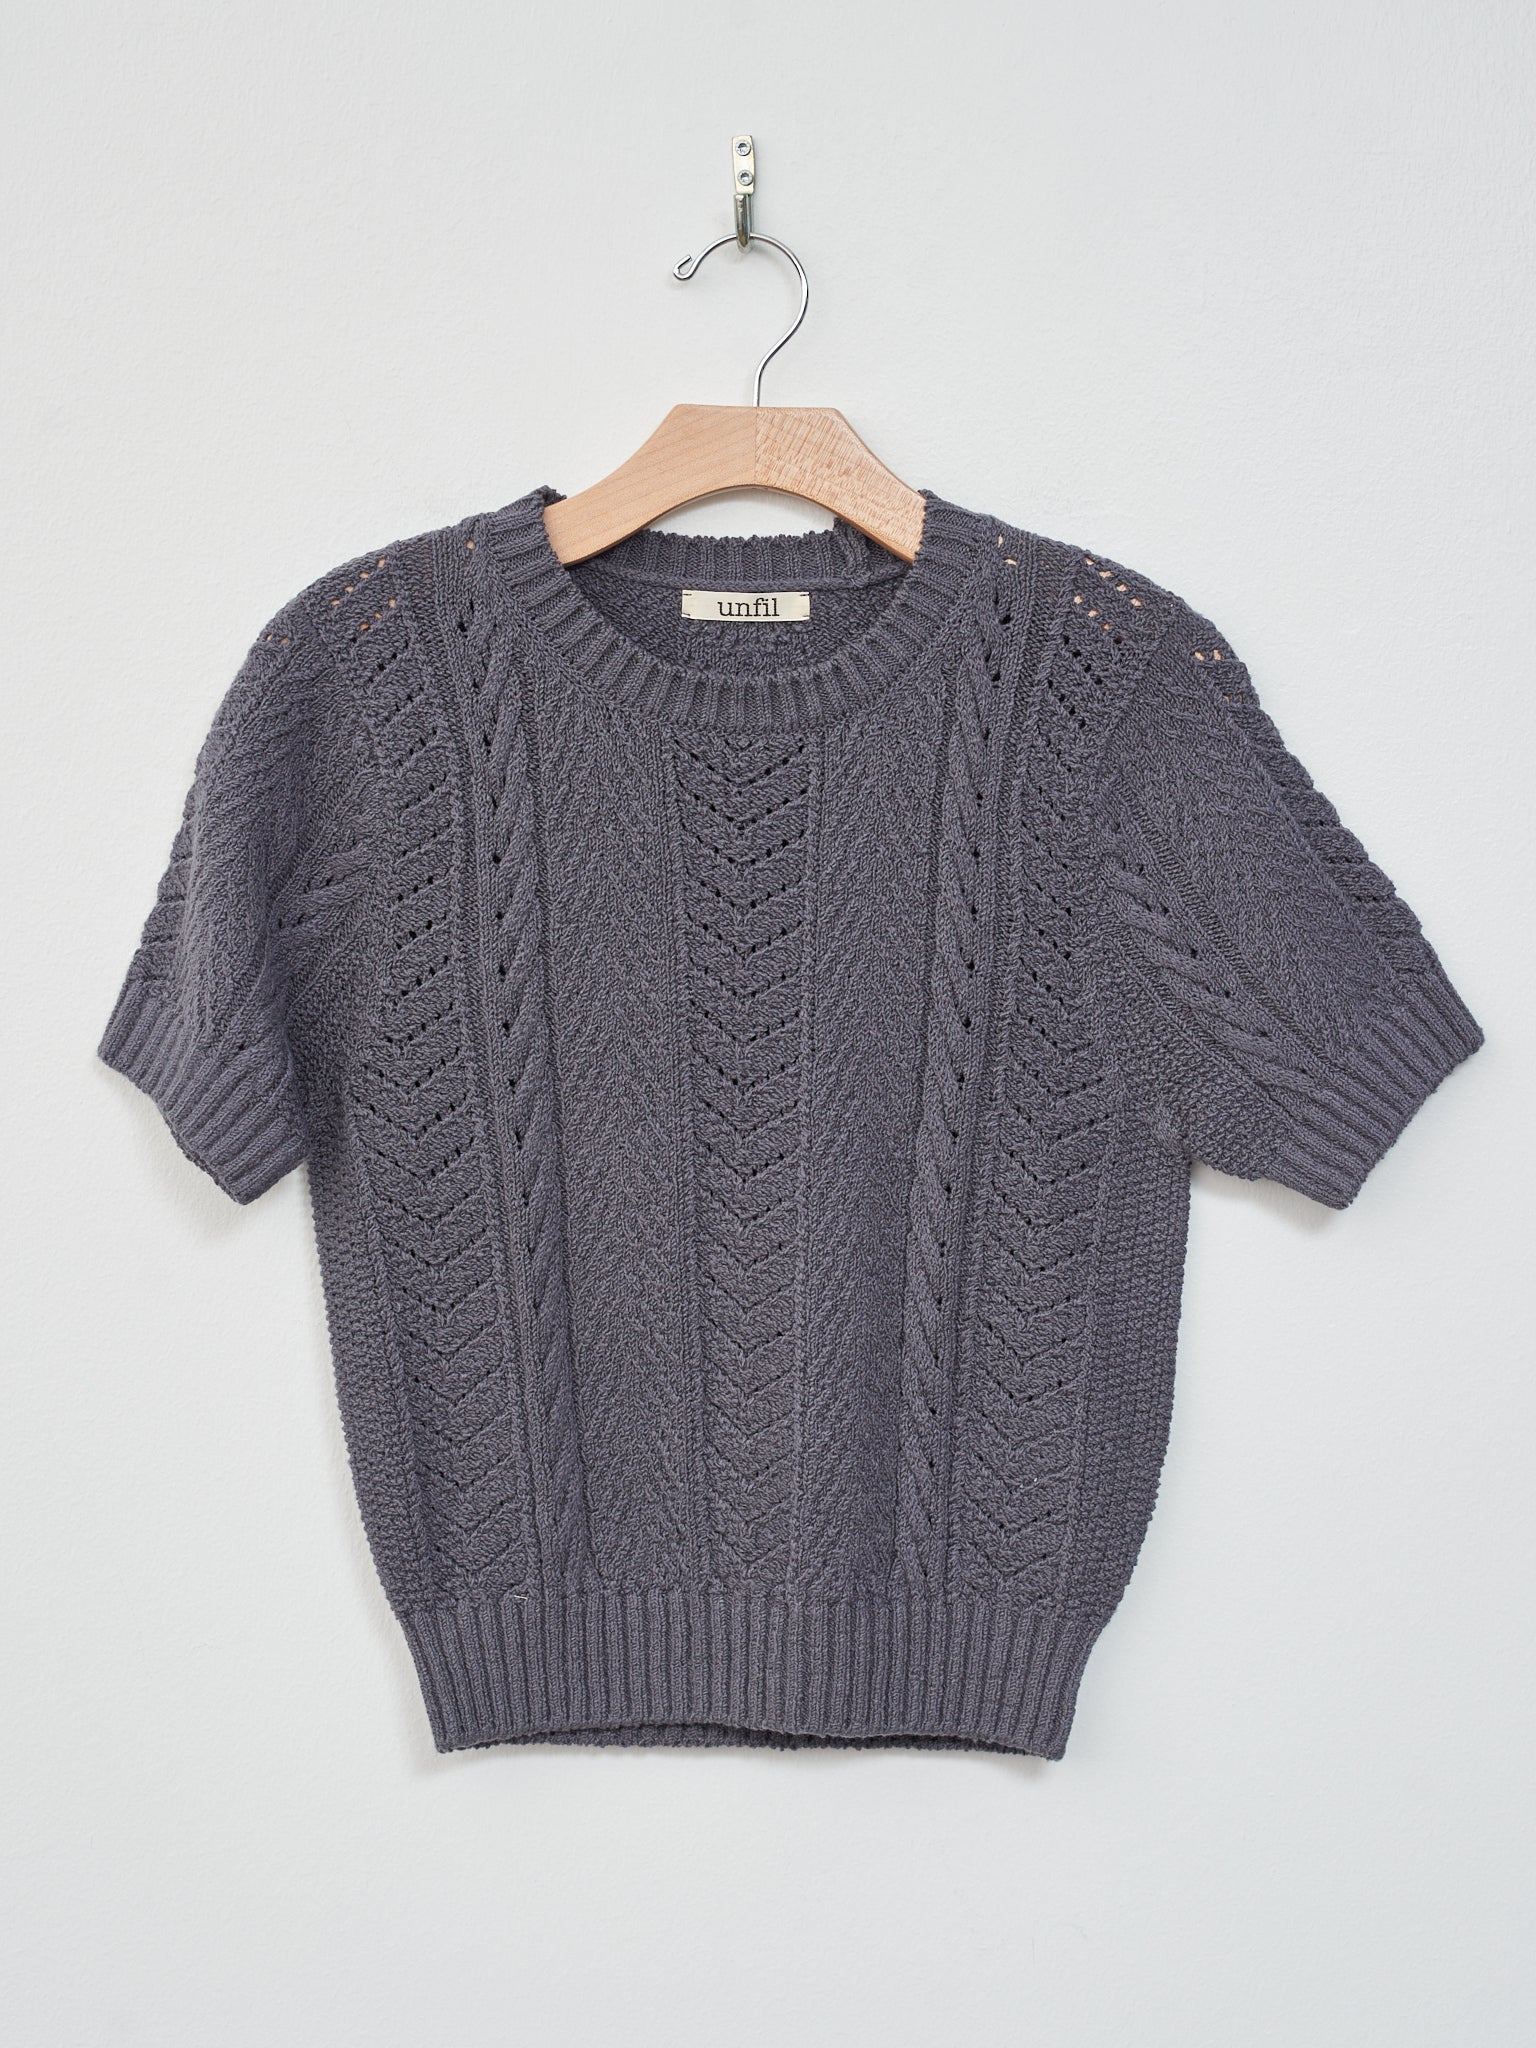 Namu Shop - Unfil Open Work Cable Knit Sweater - Charcoal